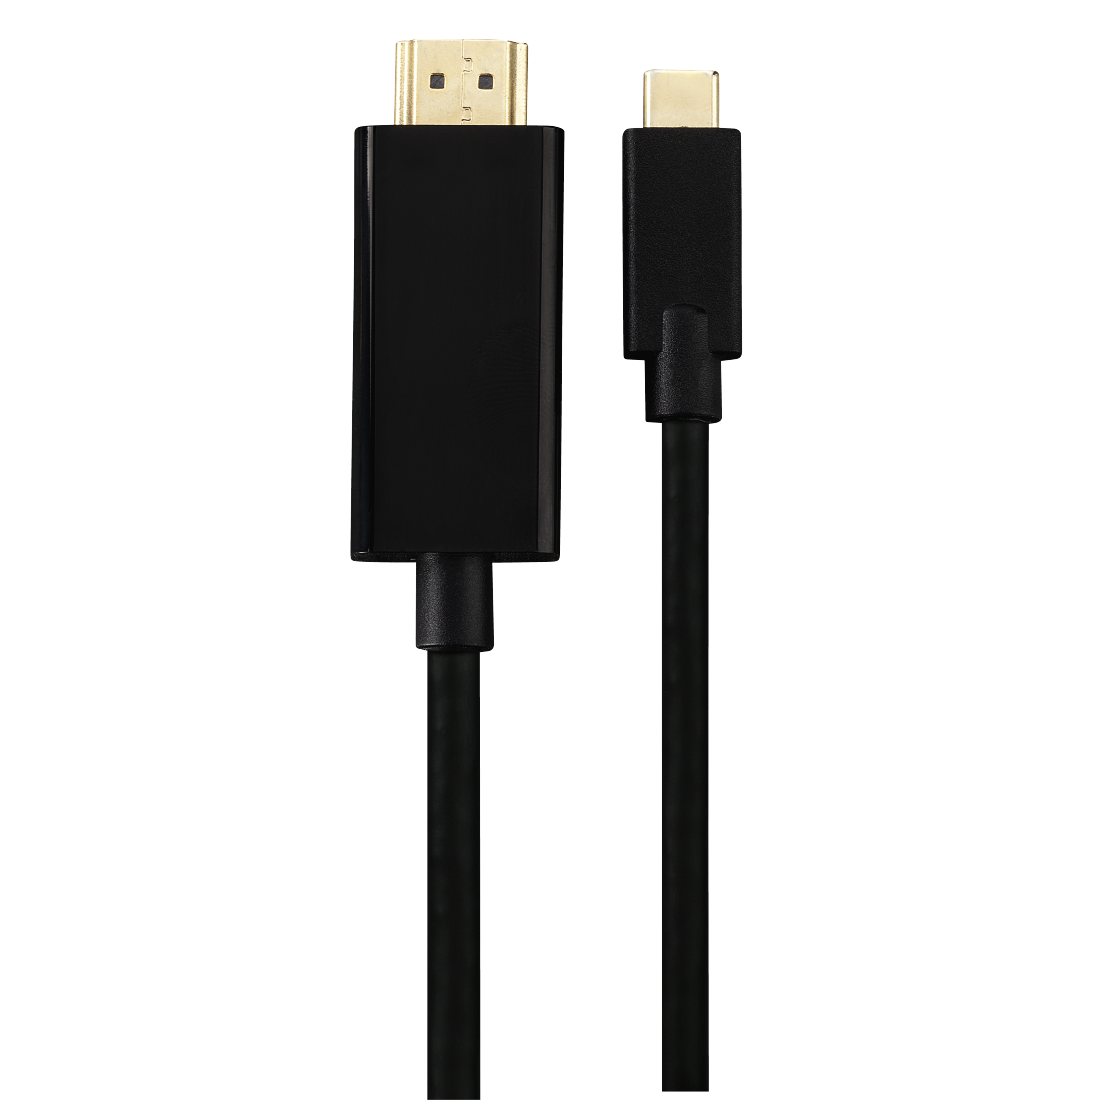 00135724 Hama USB-C Adapter Cable for HDMI™, Ultra HD, 1.80 m